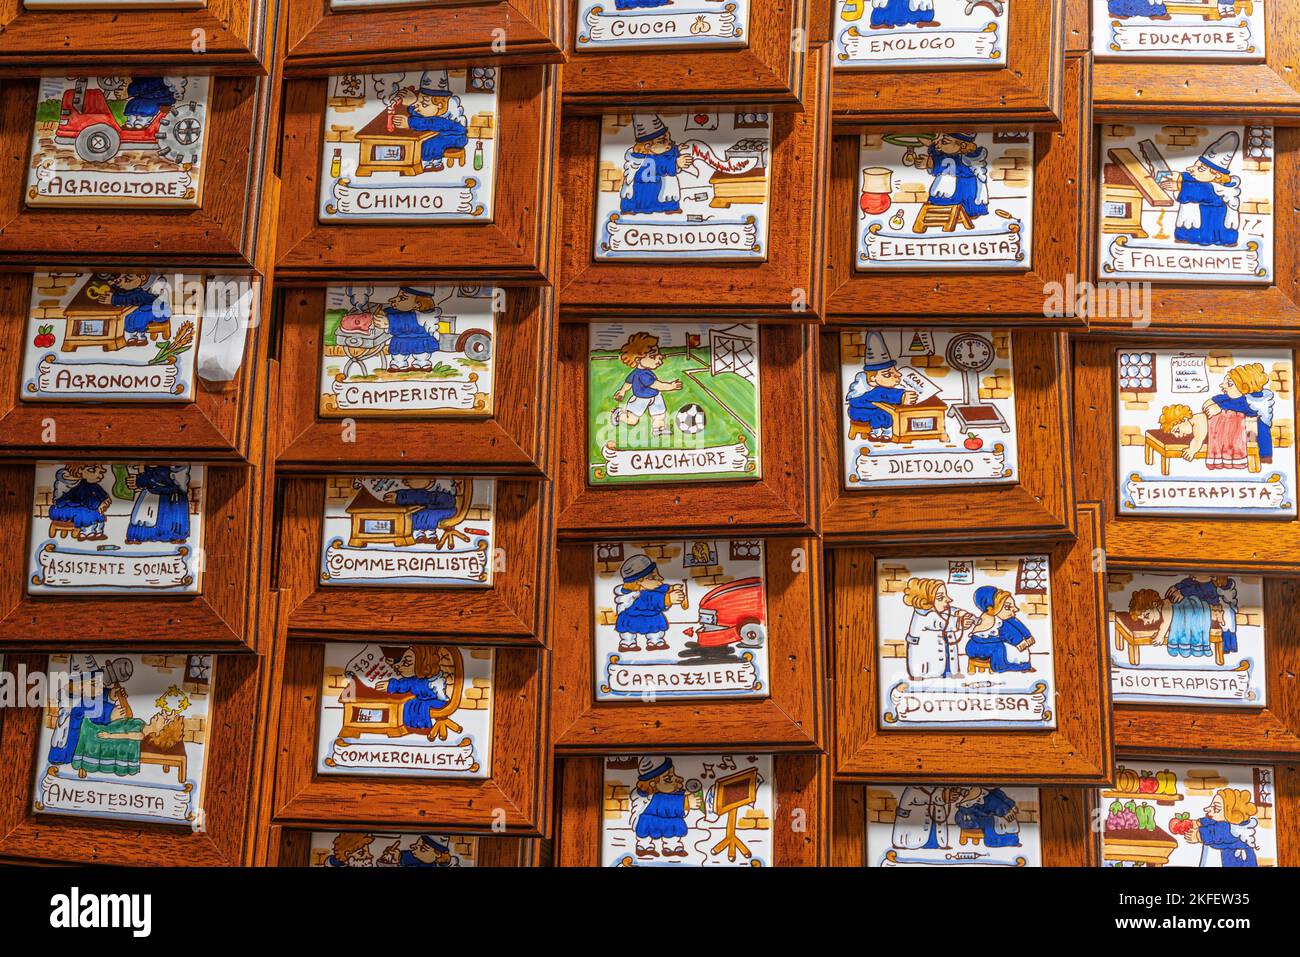 Ceramic tiles framed with the designed crafts sold as souvenirs. Perugia, Umbria, Italy, Europe Stock Photo